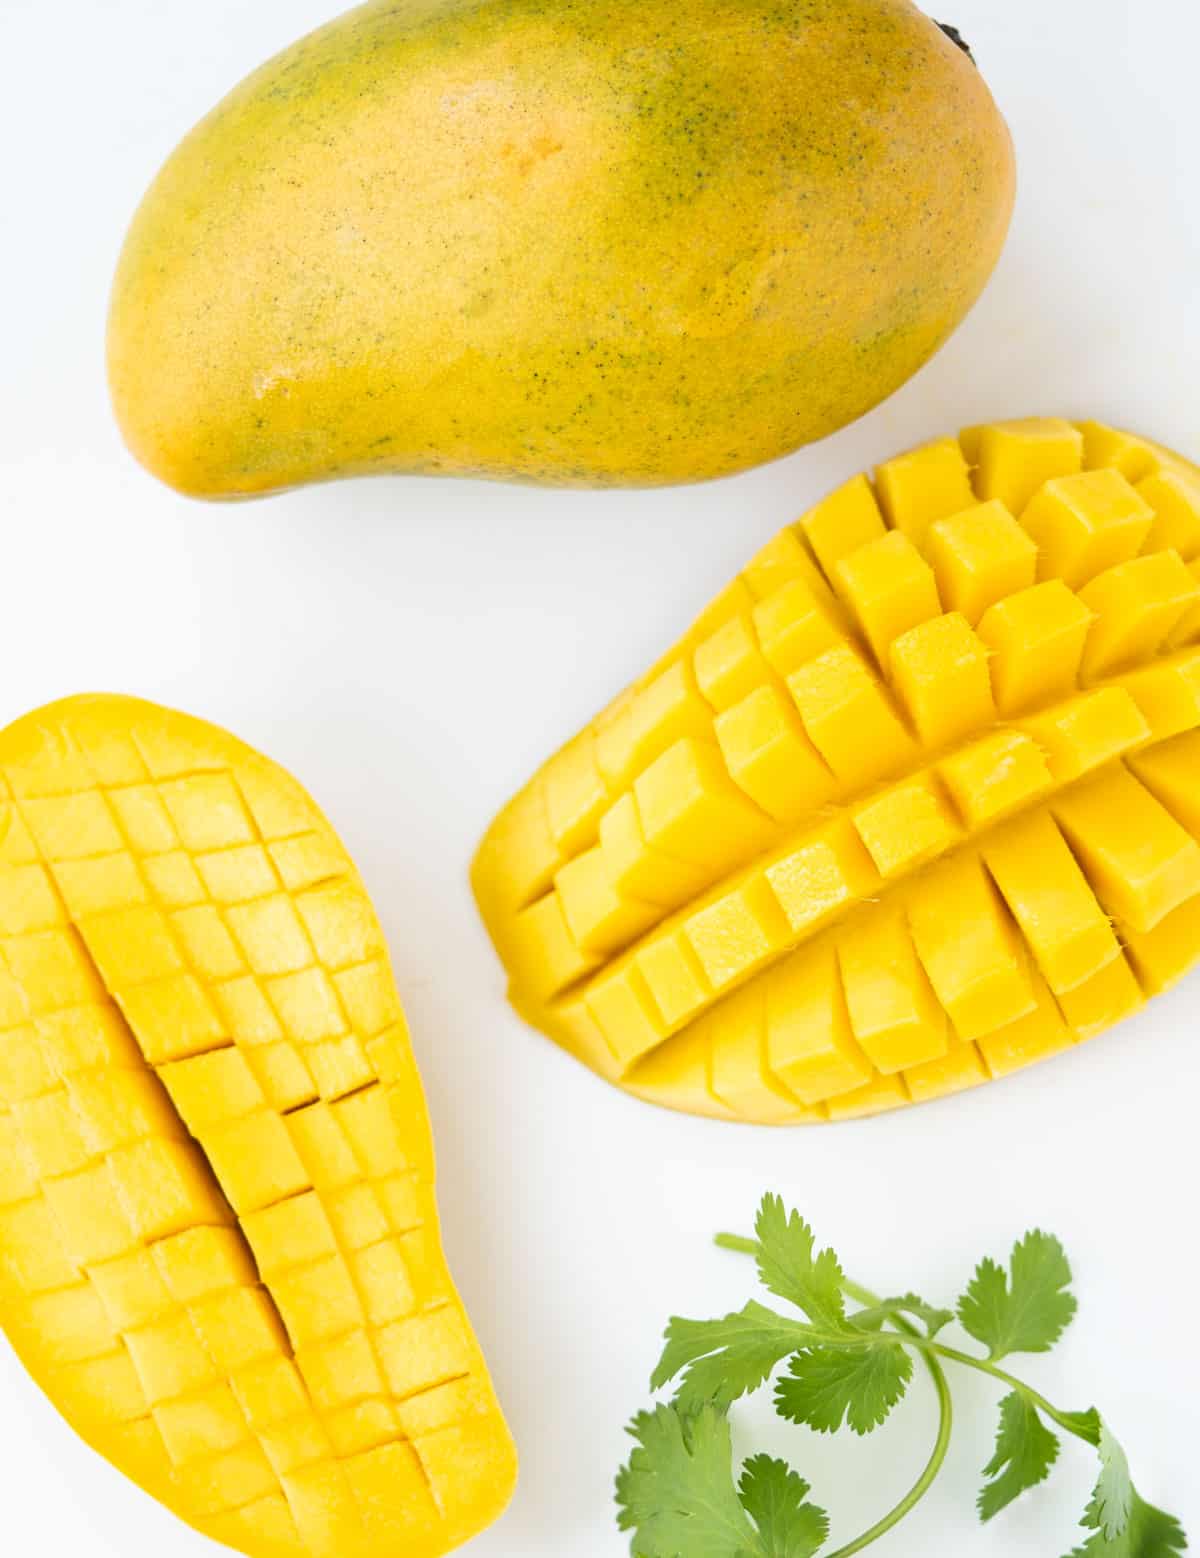 Mango cut in half with cut marks to show how to dice